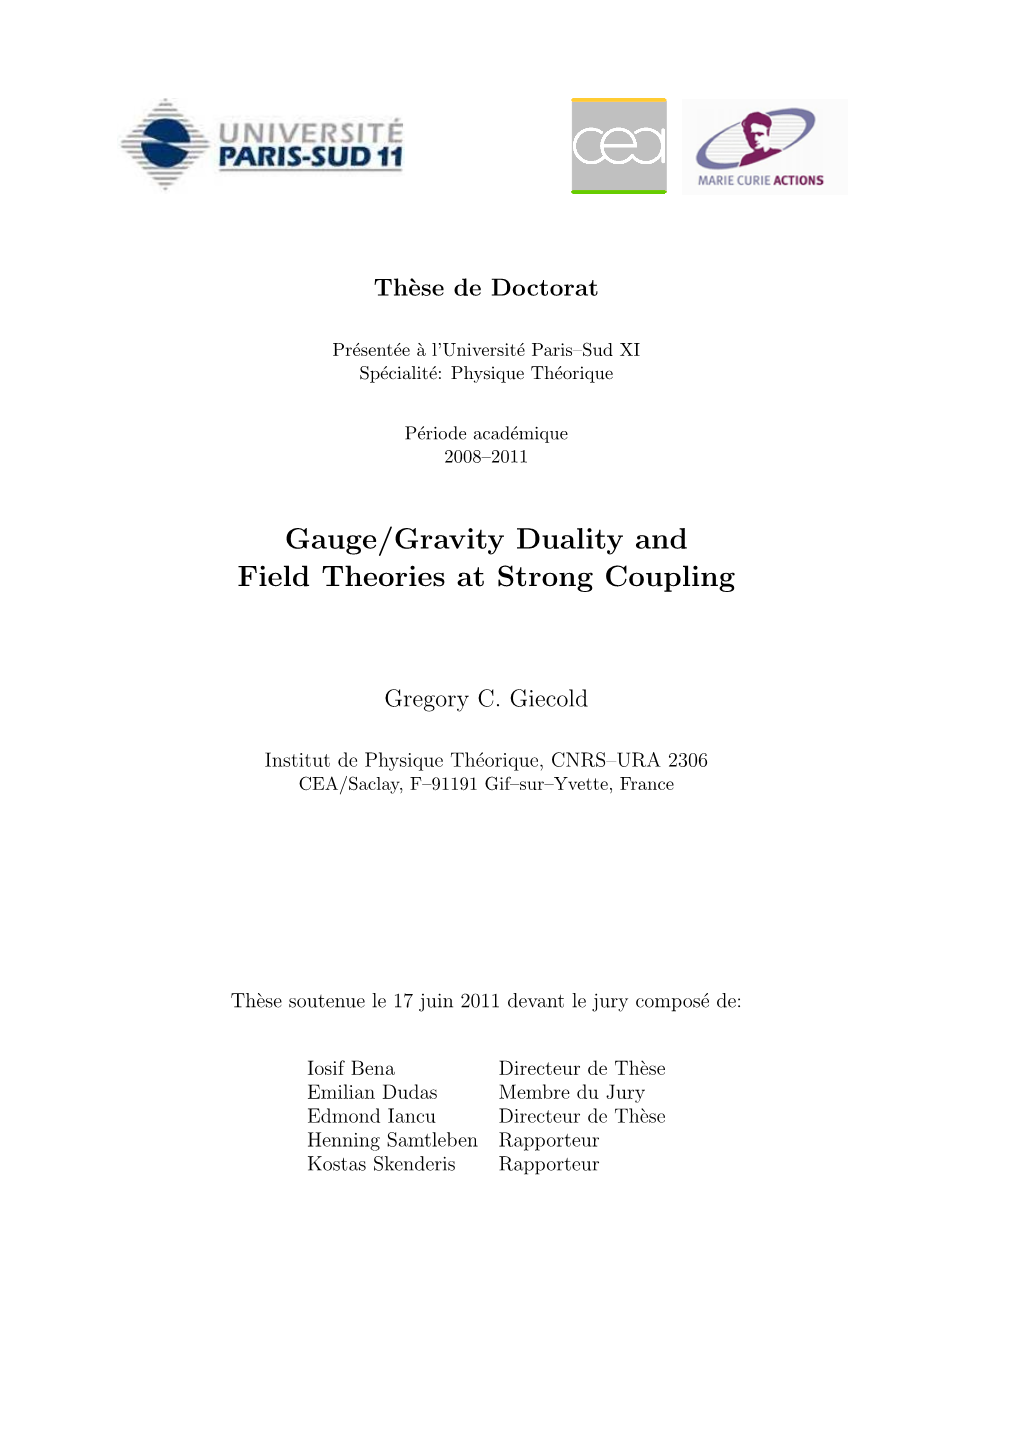 Gauge/Gravity Duality and Field Theories at Strong Coupling